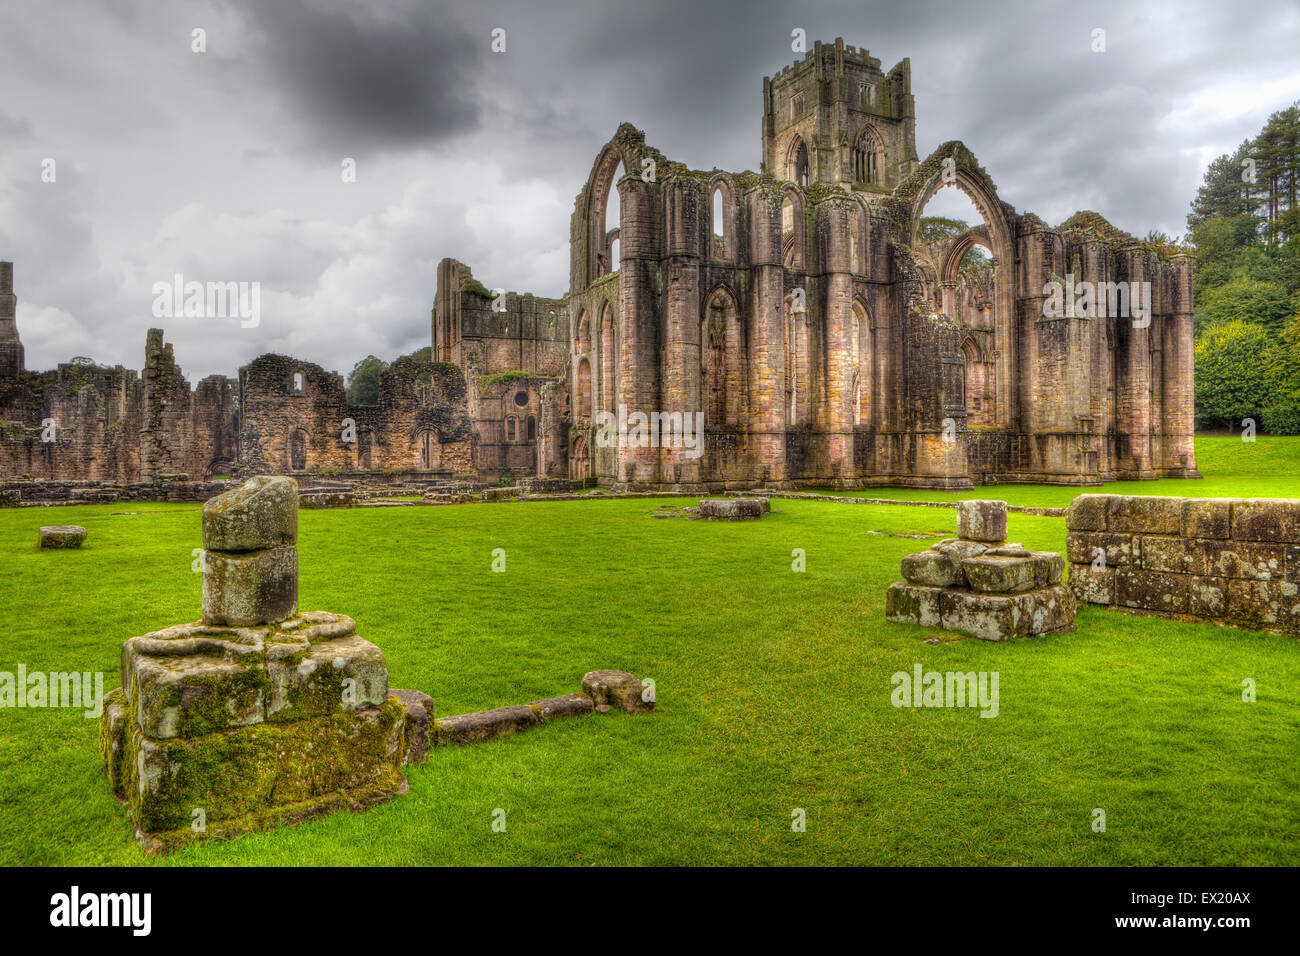 Fountains Abbey, North Yorkshire, United Kingdom Banque D'Images